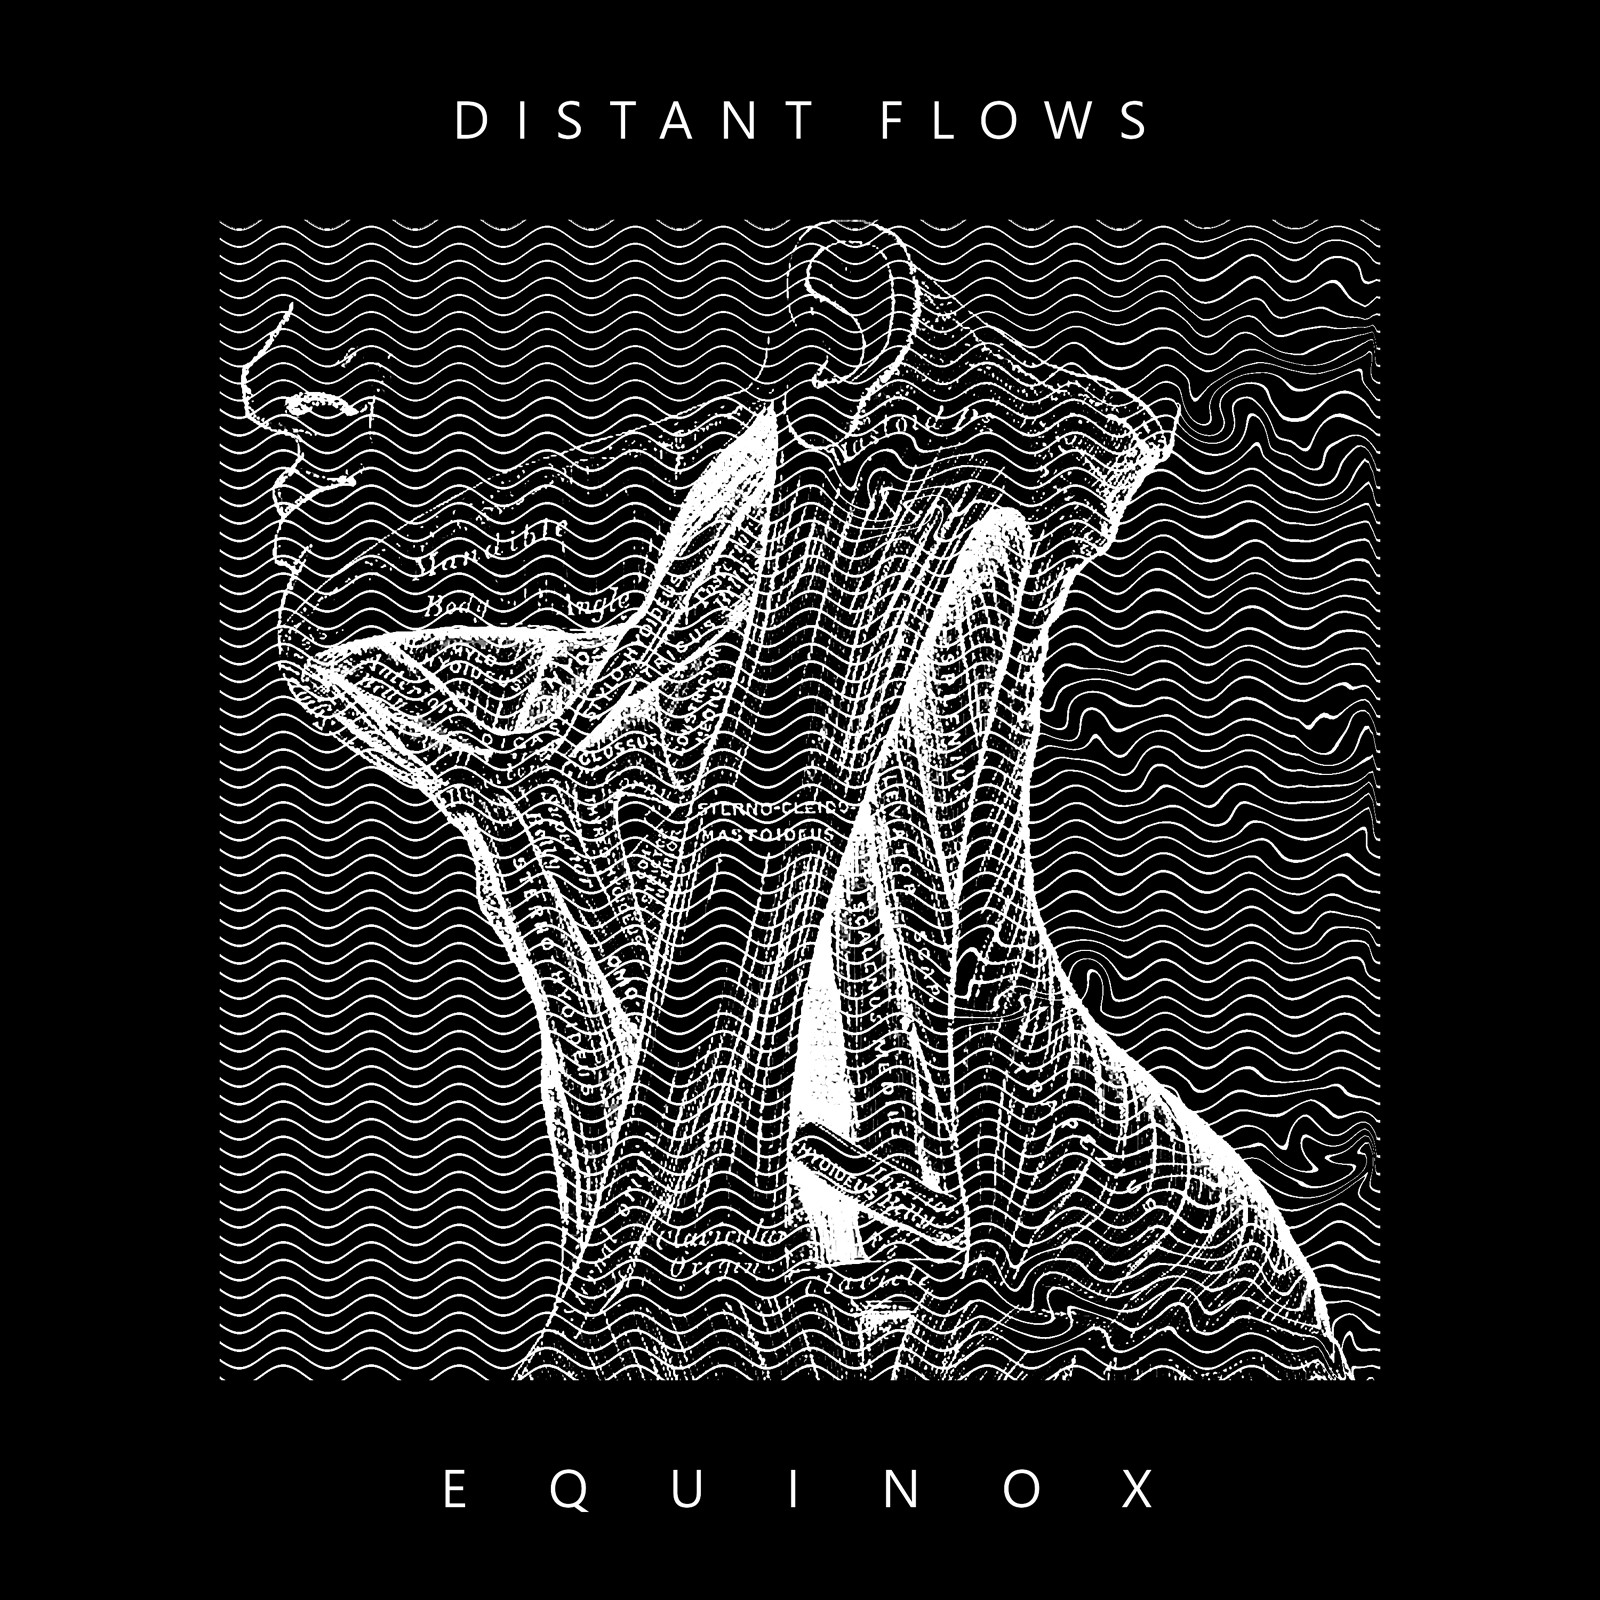 Distant Flows 'Equinox' Album Listening Party at To The Moon